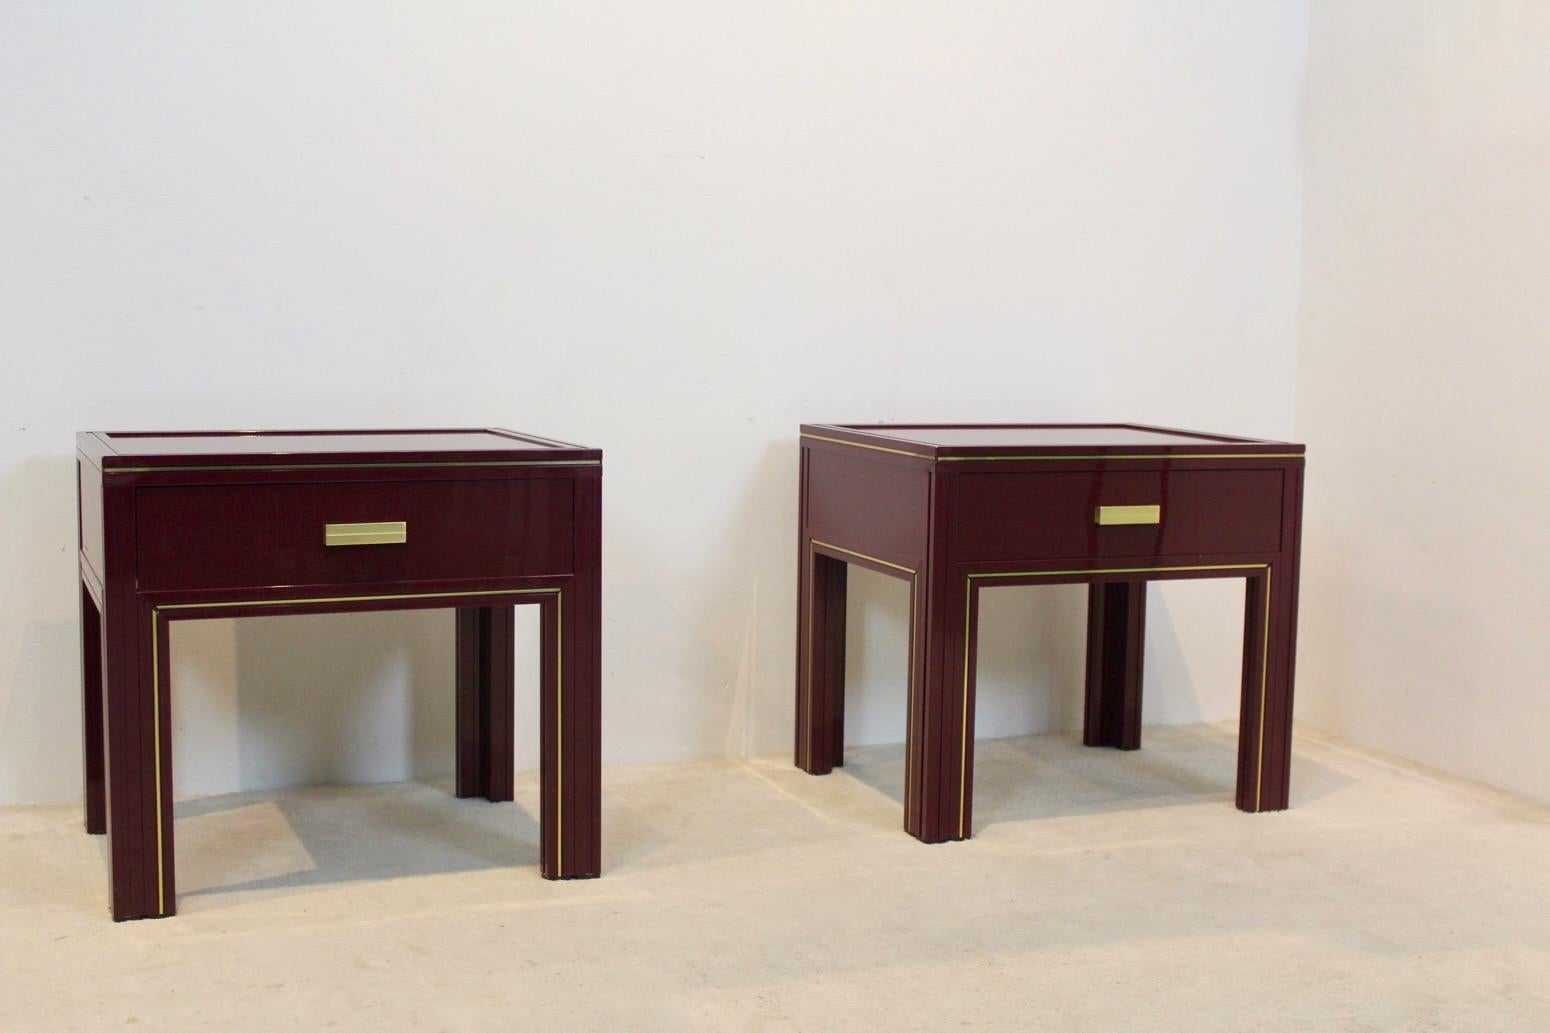 Unique Pierre Vandel Paris Burgundy Lacquered French set of sidetables or nightstands made from aluminum and glass. In burgundy aluminum with beautiful Gold accents. Featuring one drawers and glass tier. With some light wear due to age and use.